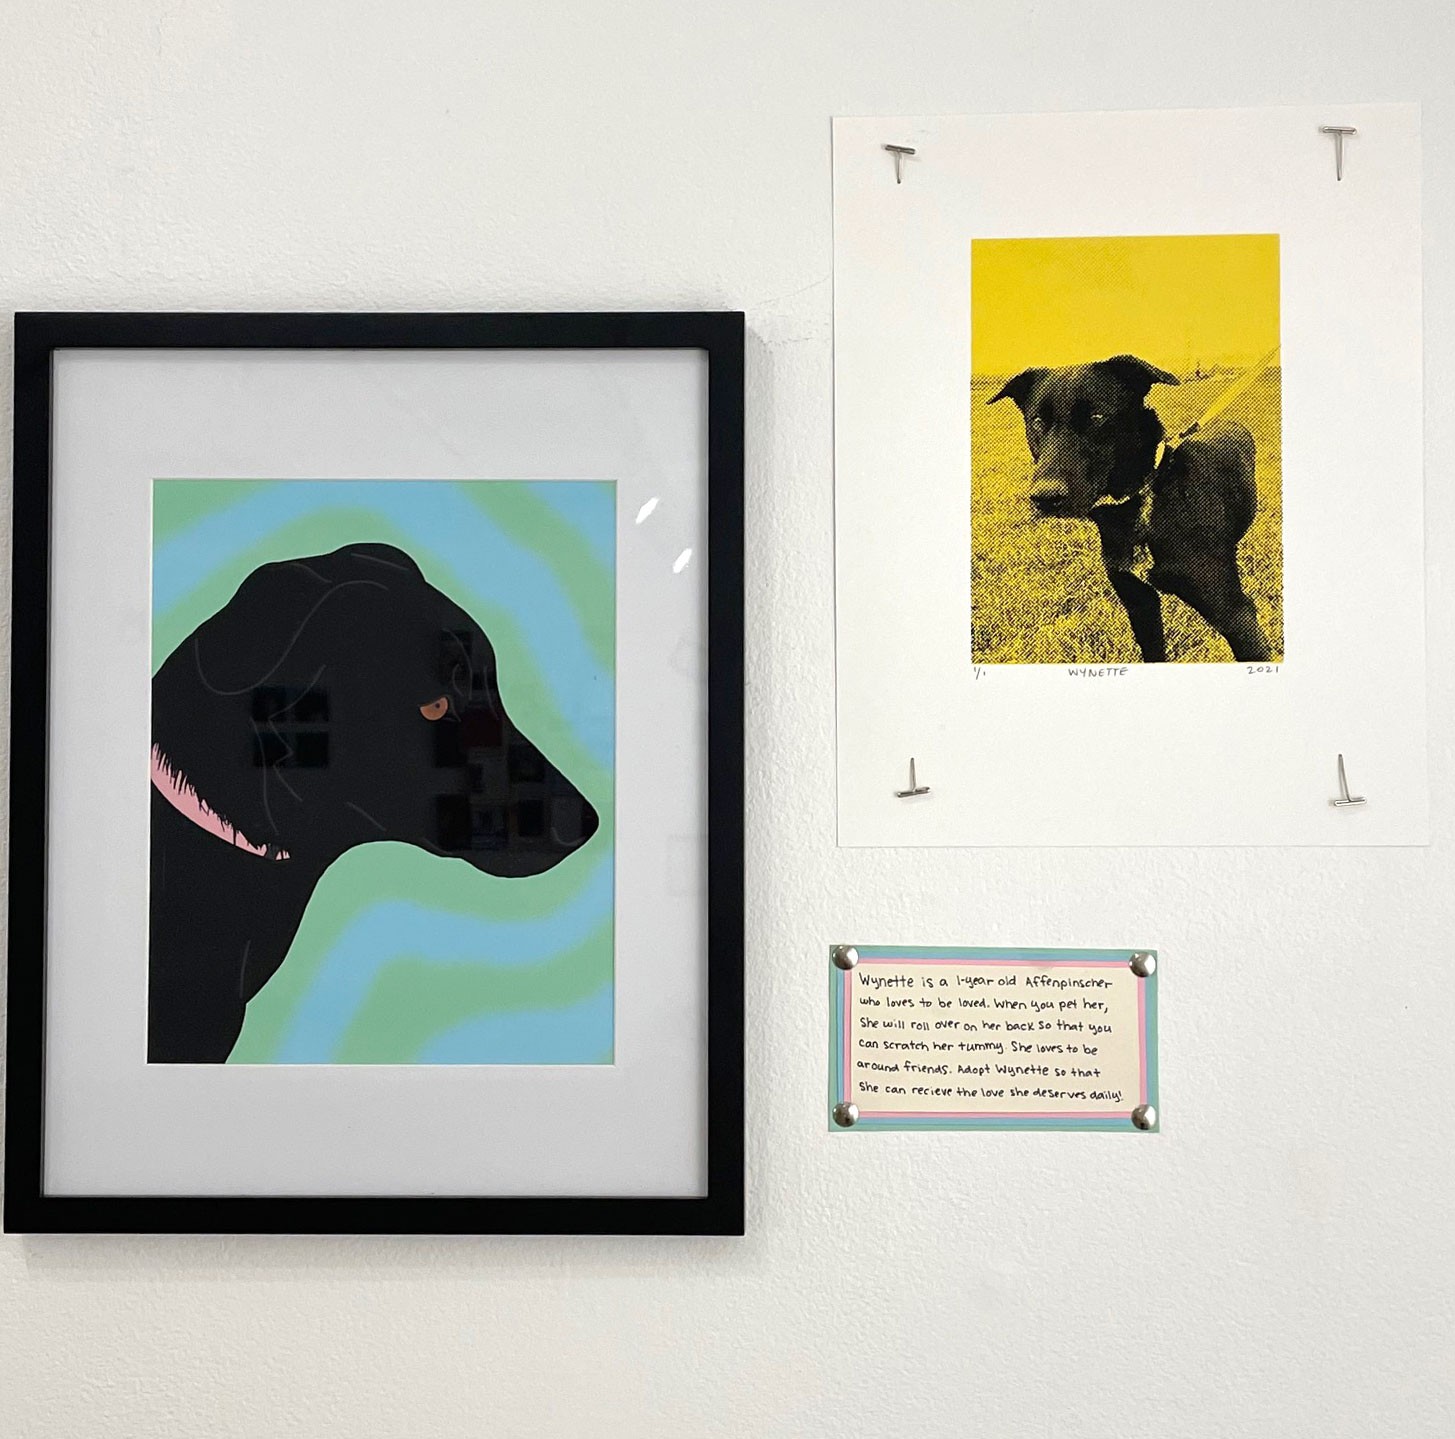 A student project with pictures of dogs hangs in a gallery.